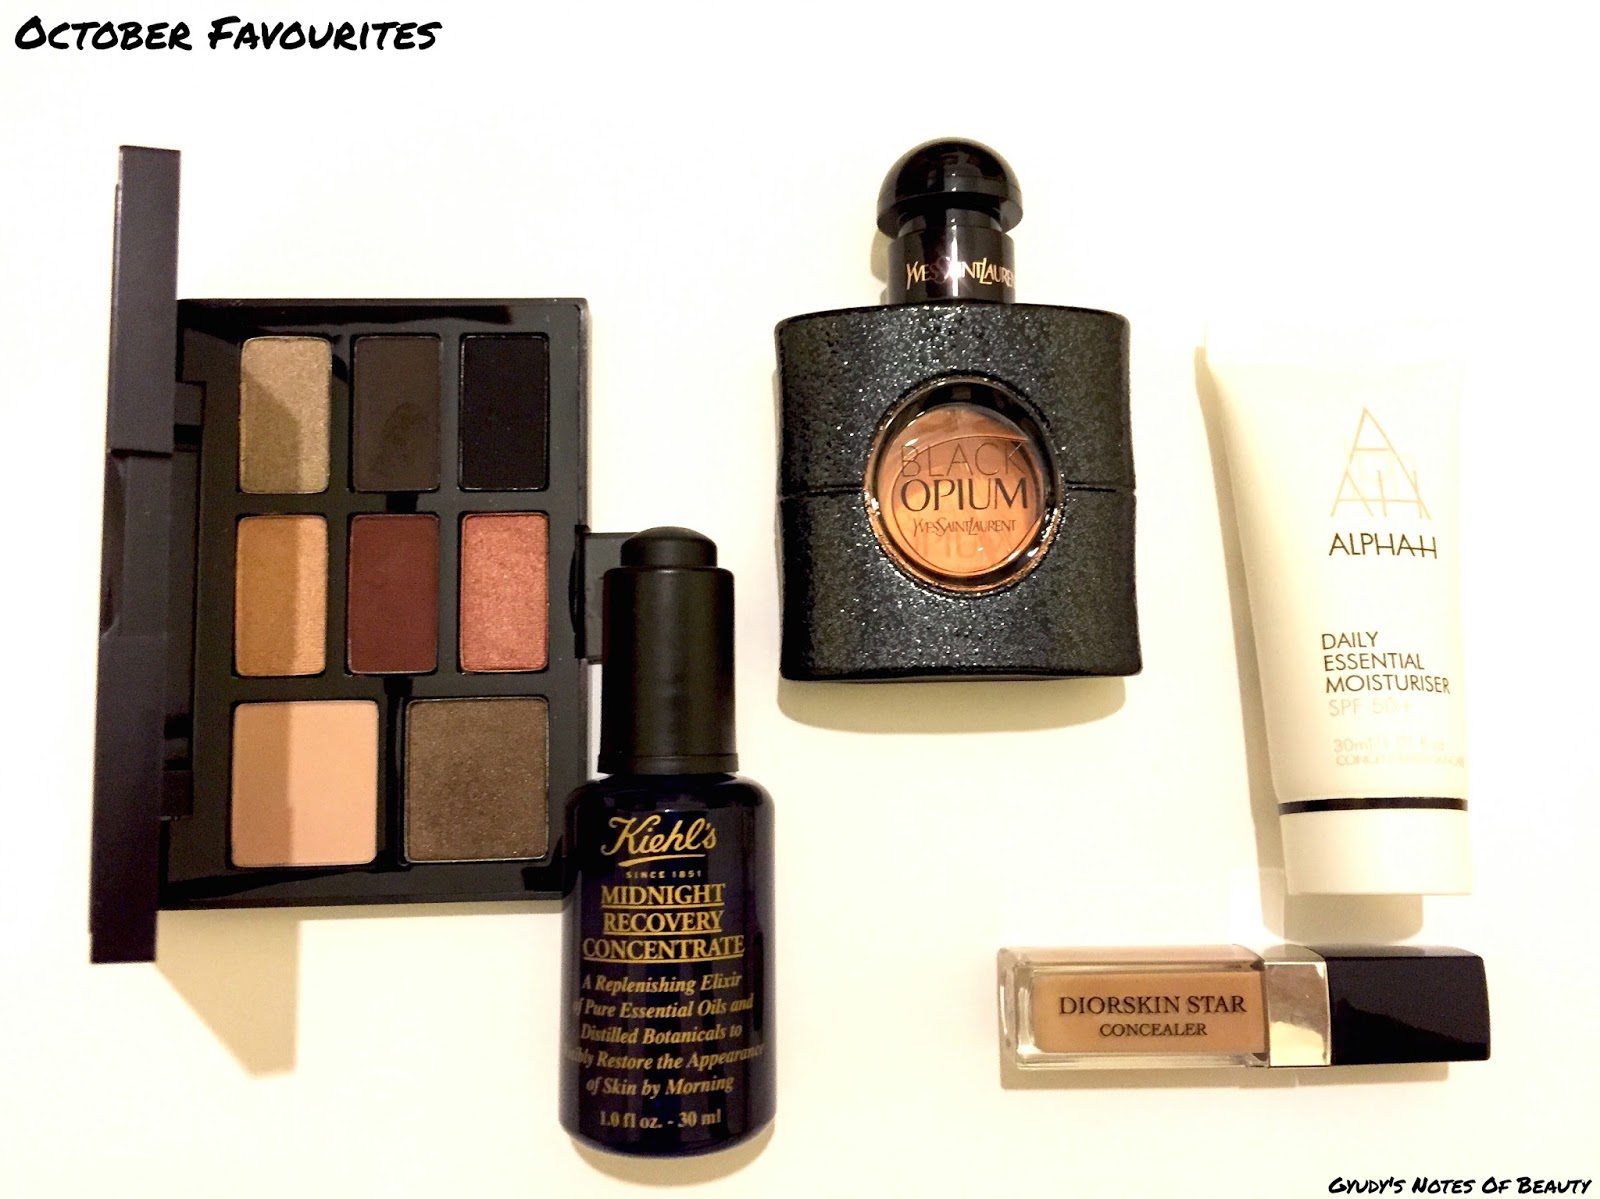 October Favourites Gyudy's Notes Of Beauty